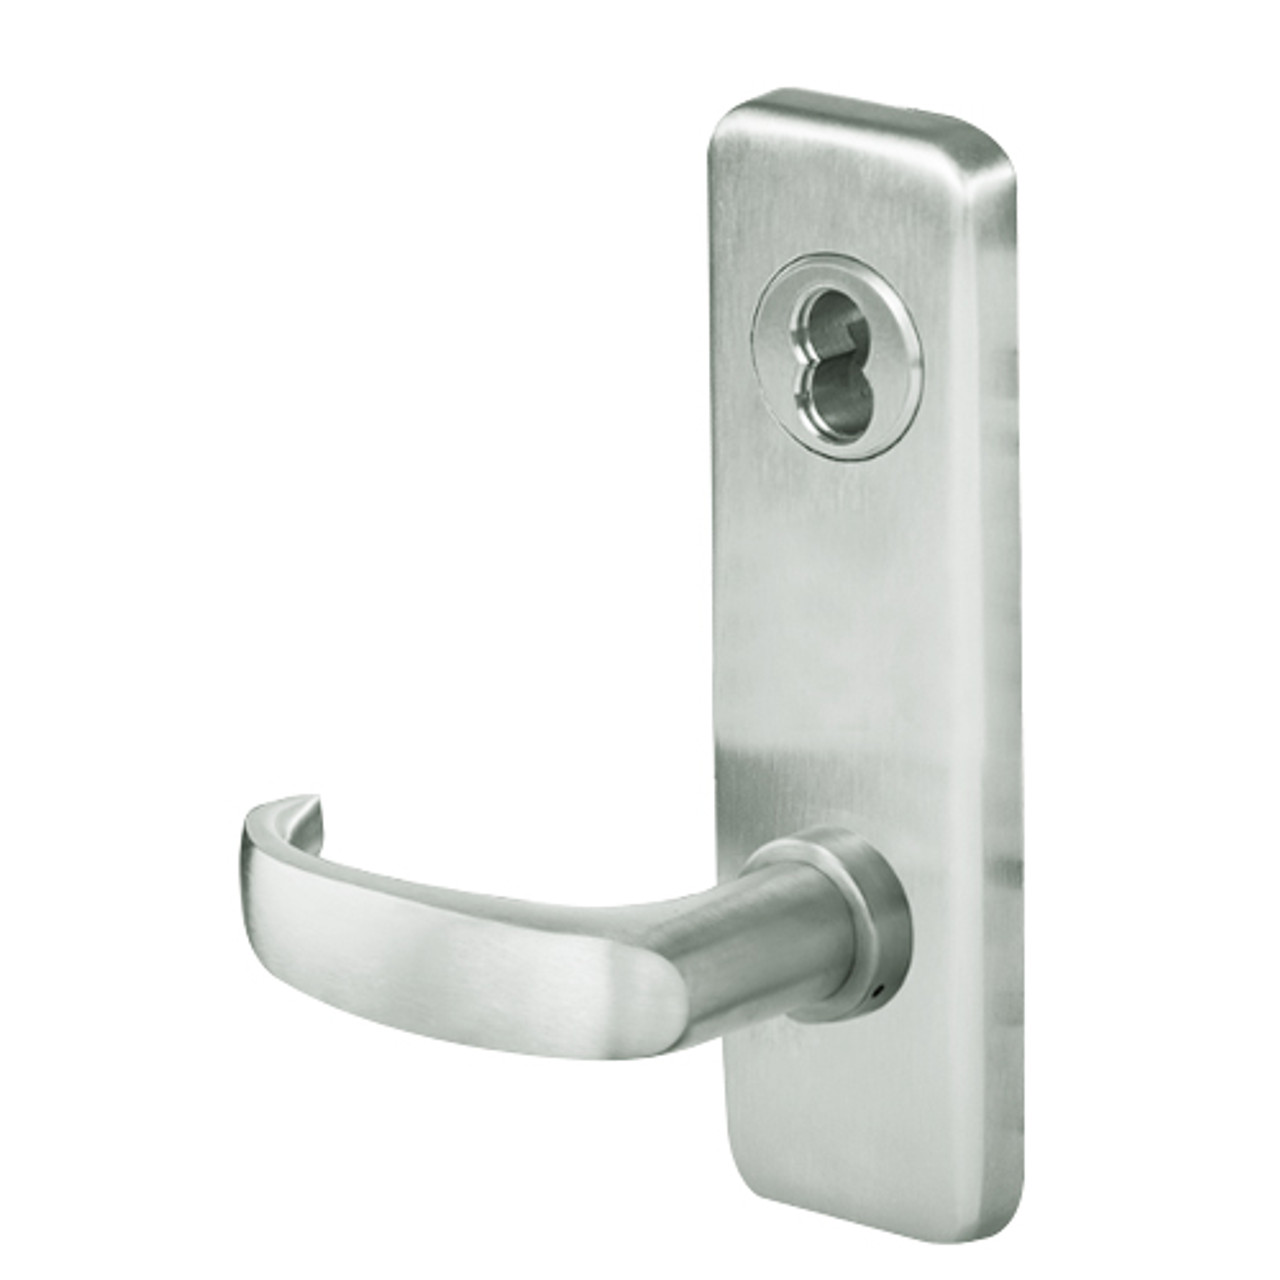 45H7G14J618 Best 40H Series Communicating with Deadbolt Heavy Duty Mortise Lever Lock with Curved with Return Style in Bright Nickel